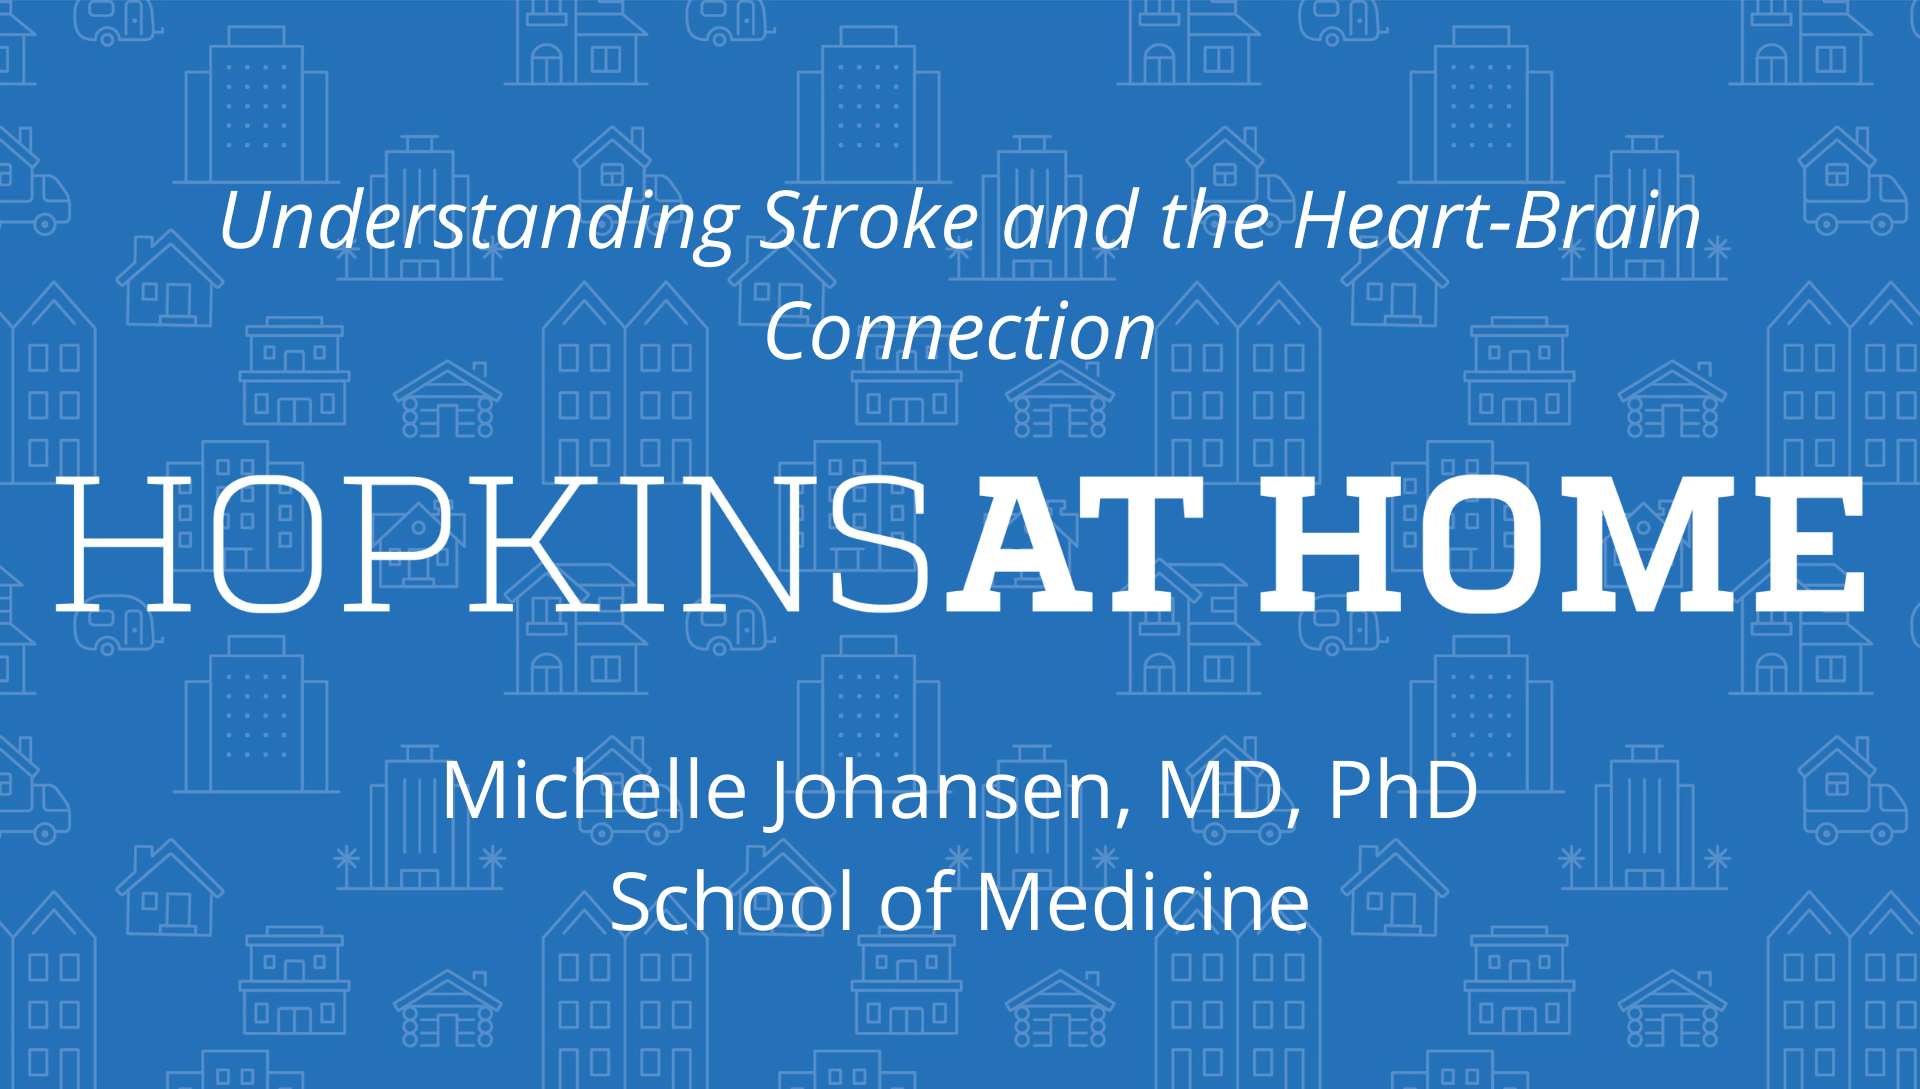 Understanding Stroke and the Heart-Brain Connection